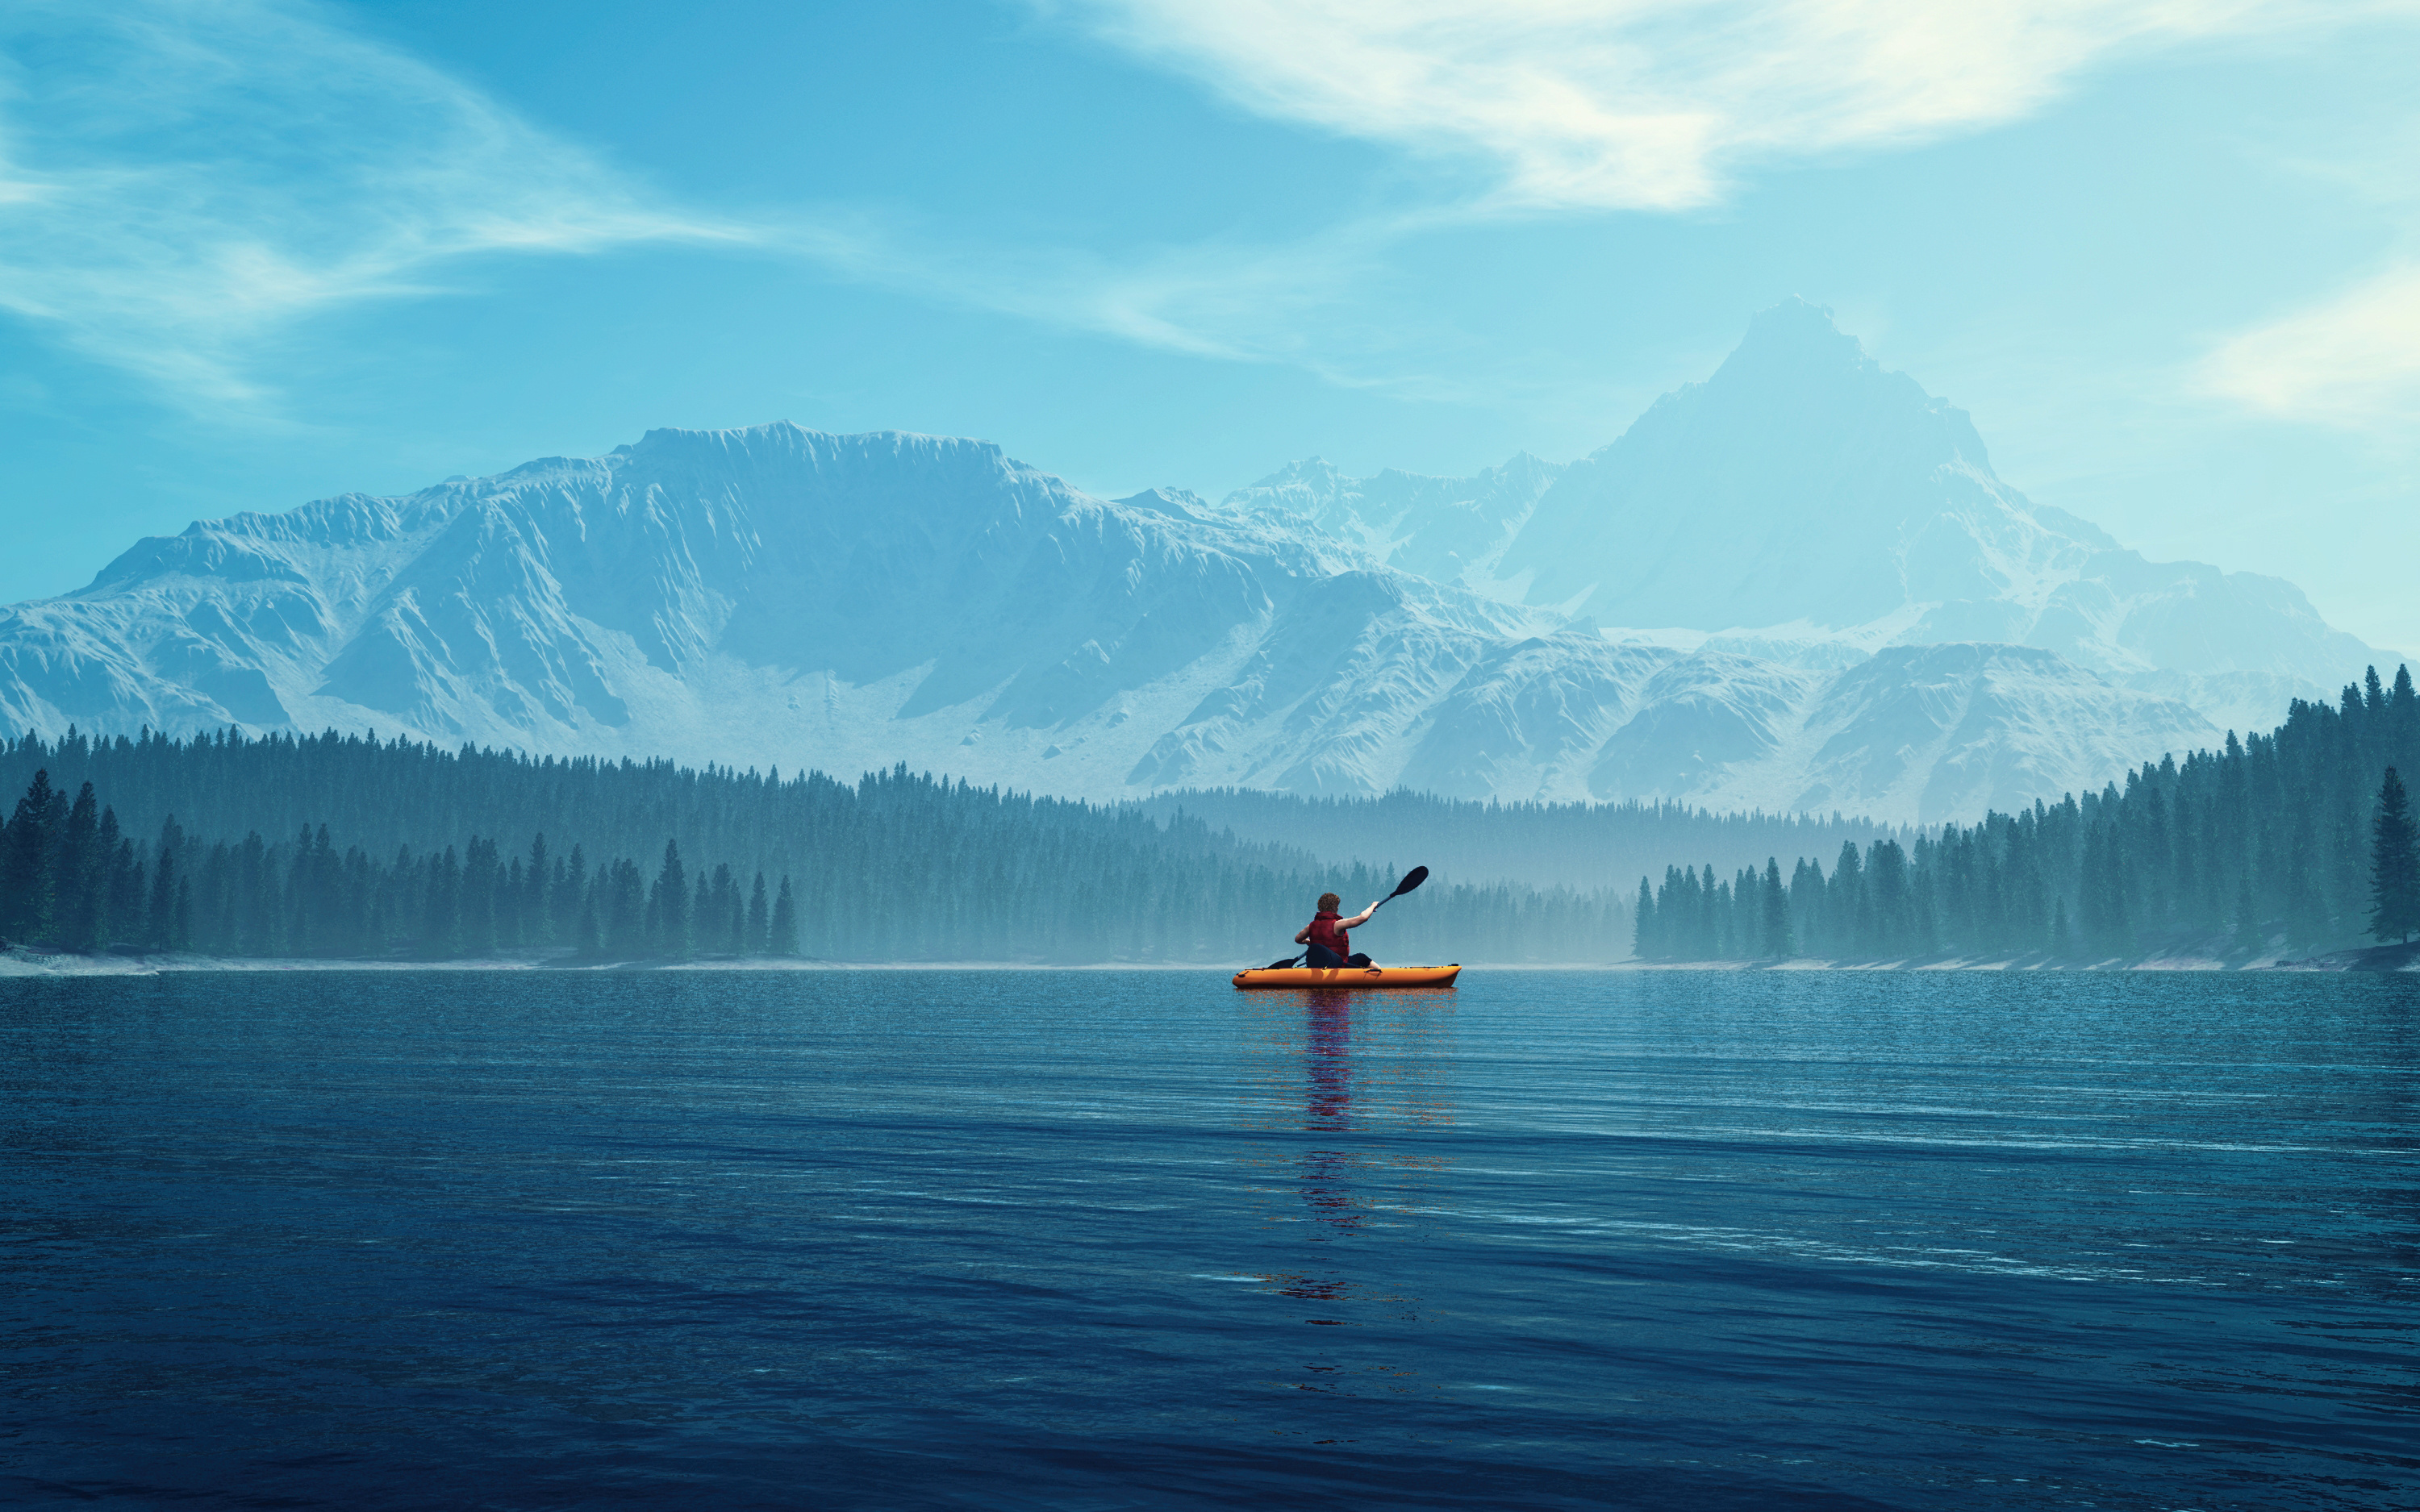 Photo of person in orange kayak, paddling across calm blue water with blue-hued forests and large snowy blue mountains in the background.